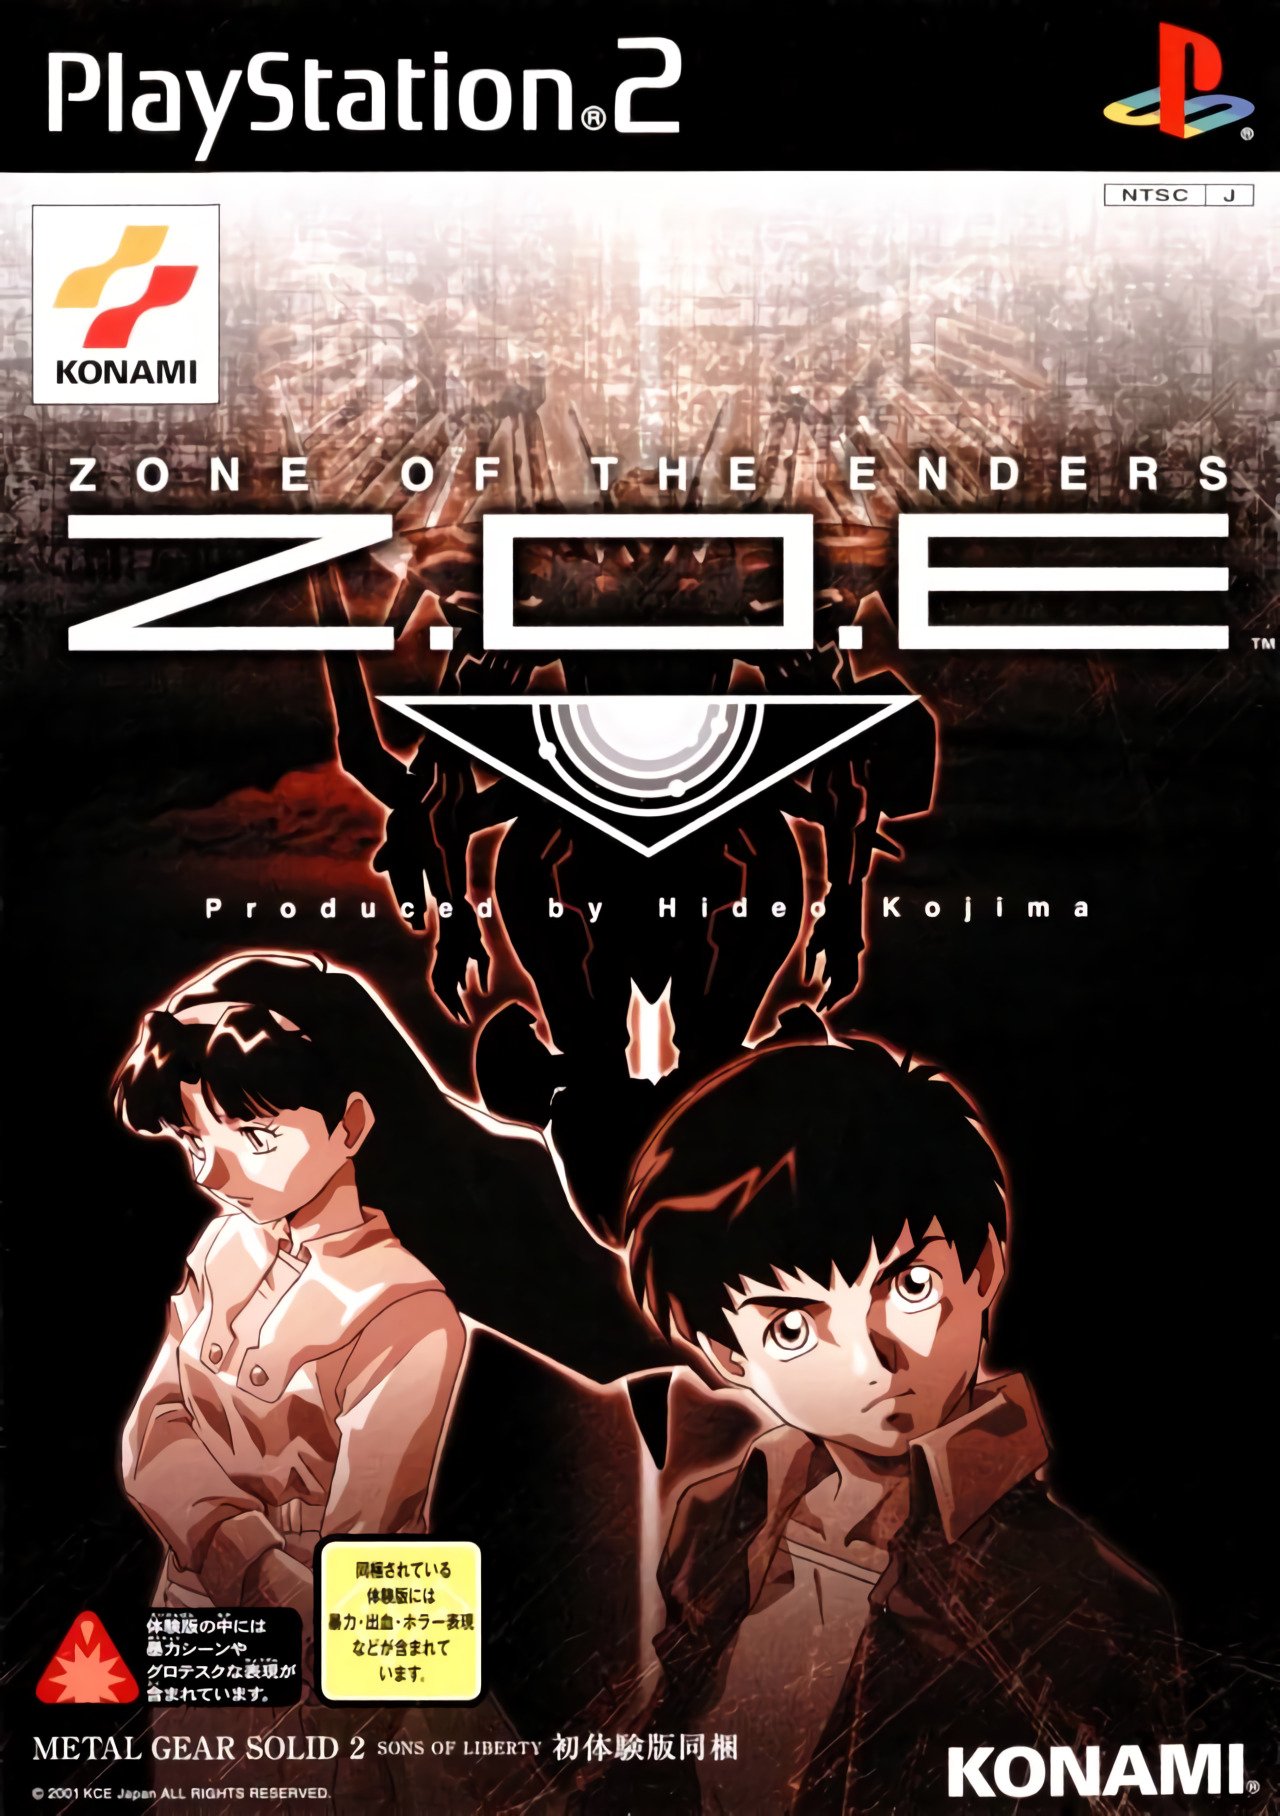 Z.O.E.: Zone of the Enders